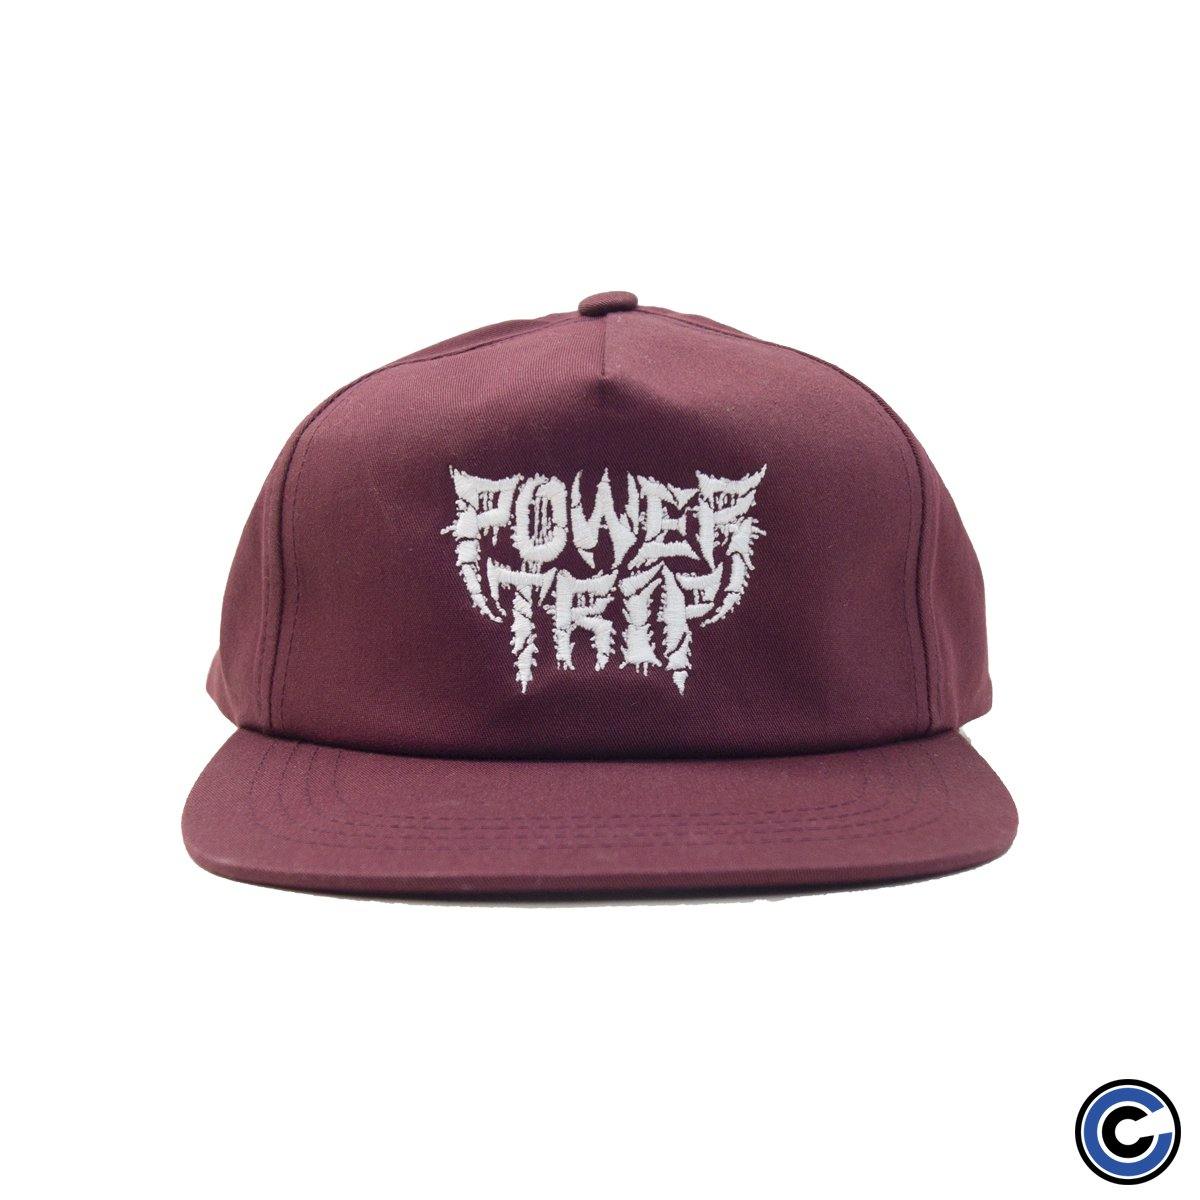 Buy – Power Trip "Distorted Logo" Hat – Band & Music Merch – Cold Cuts Merch